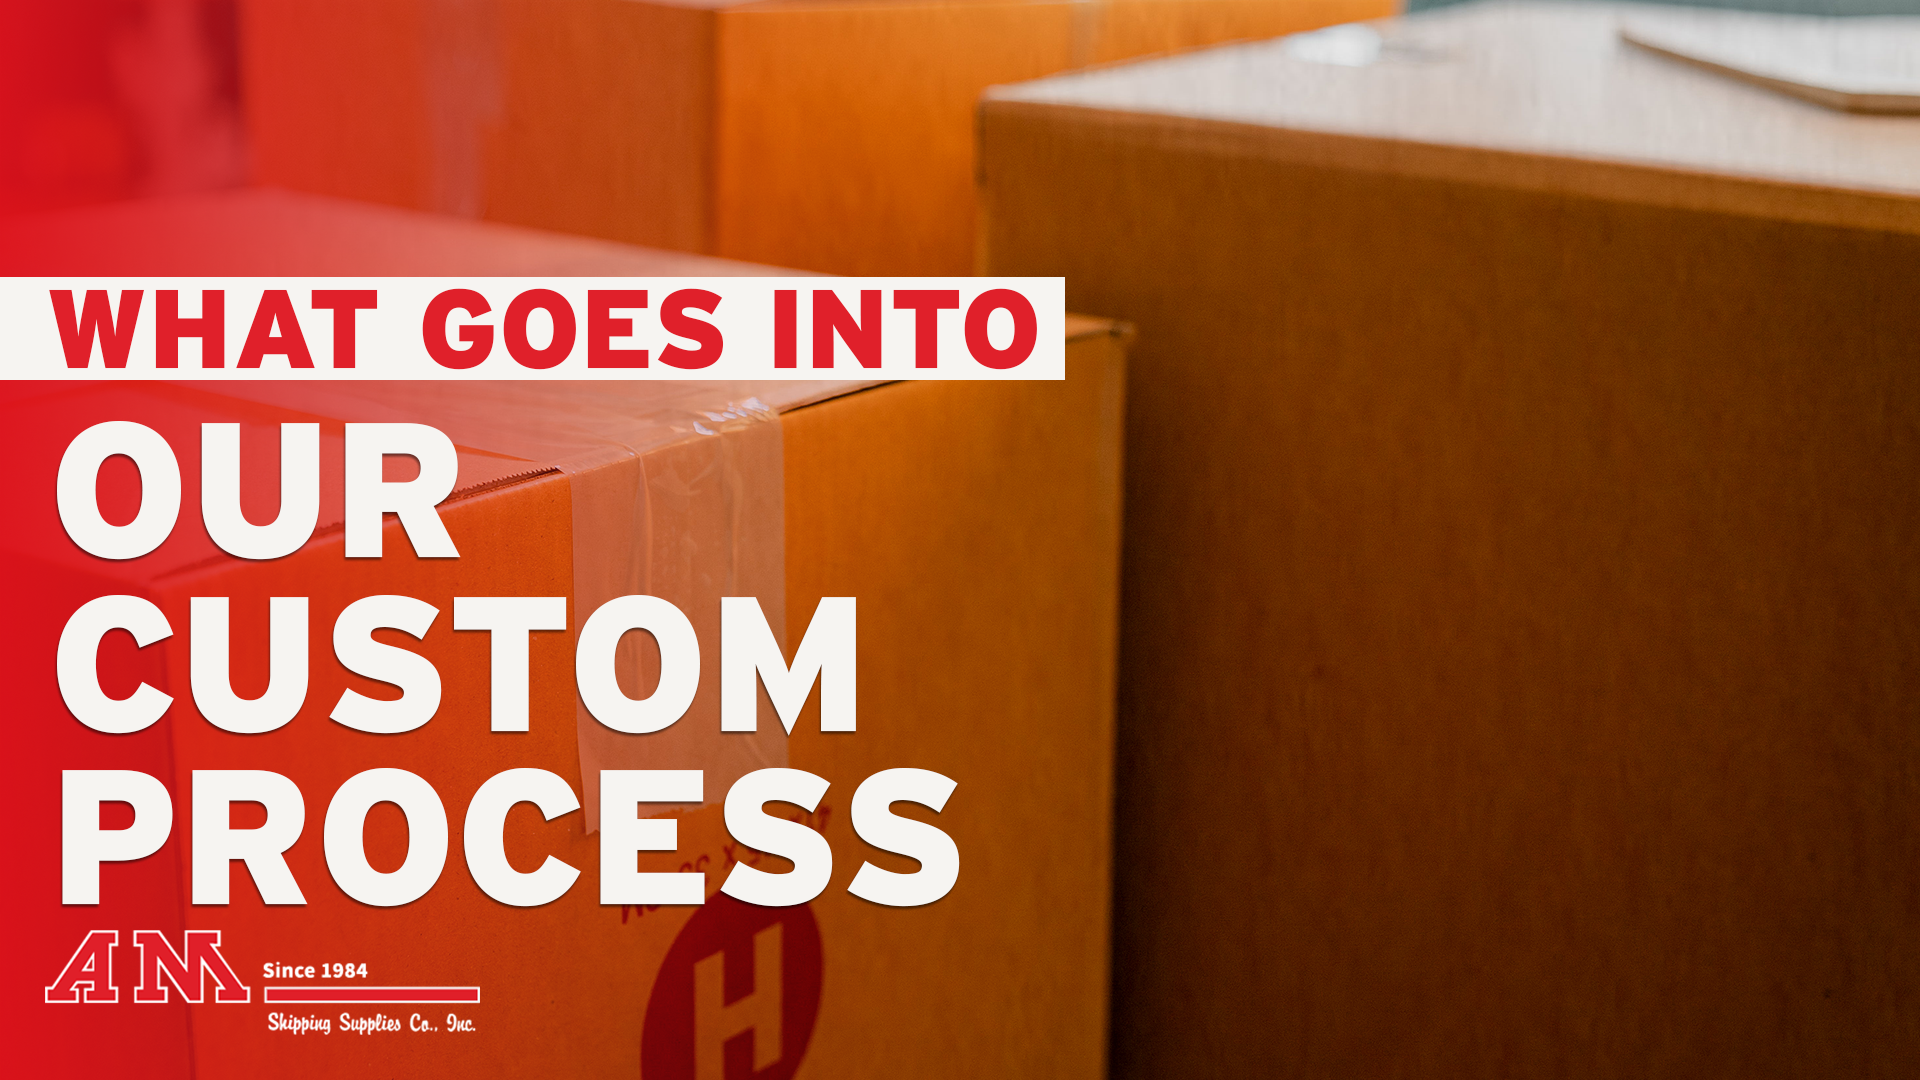 What Goes into Our Custom Process?